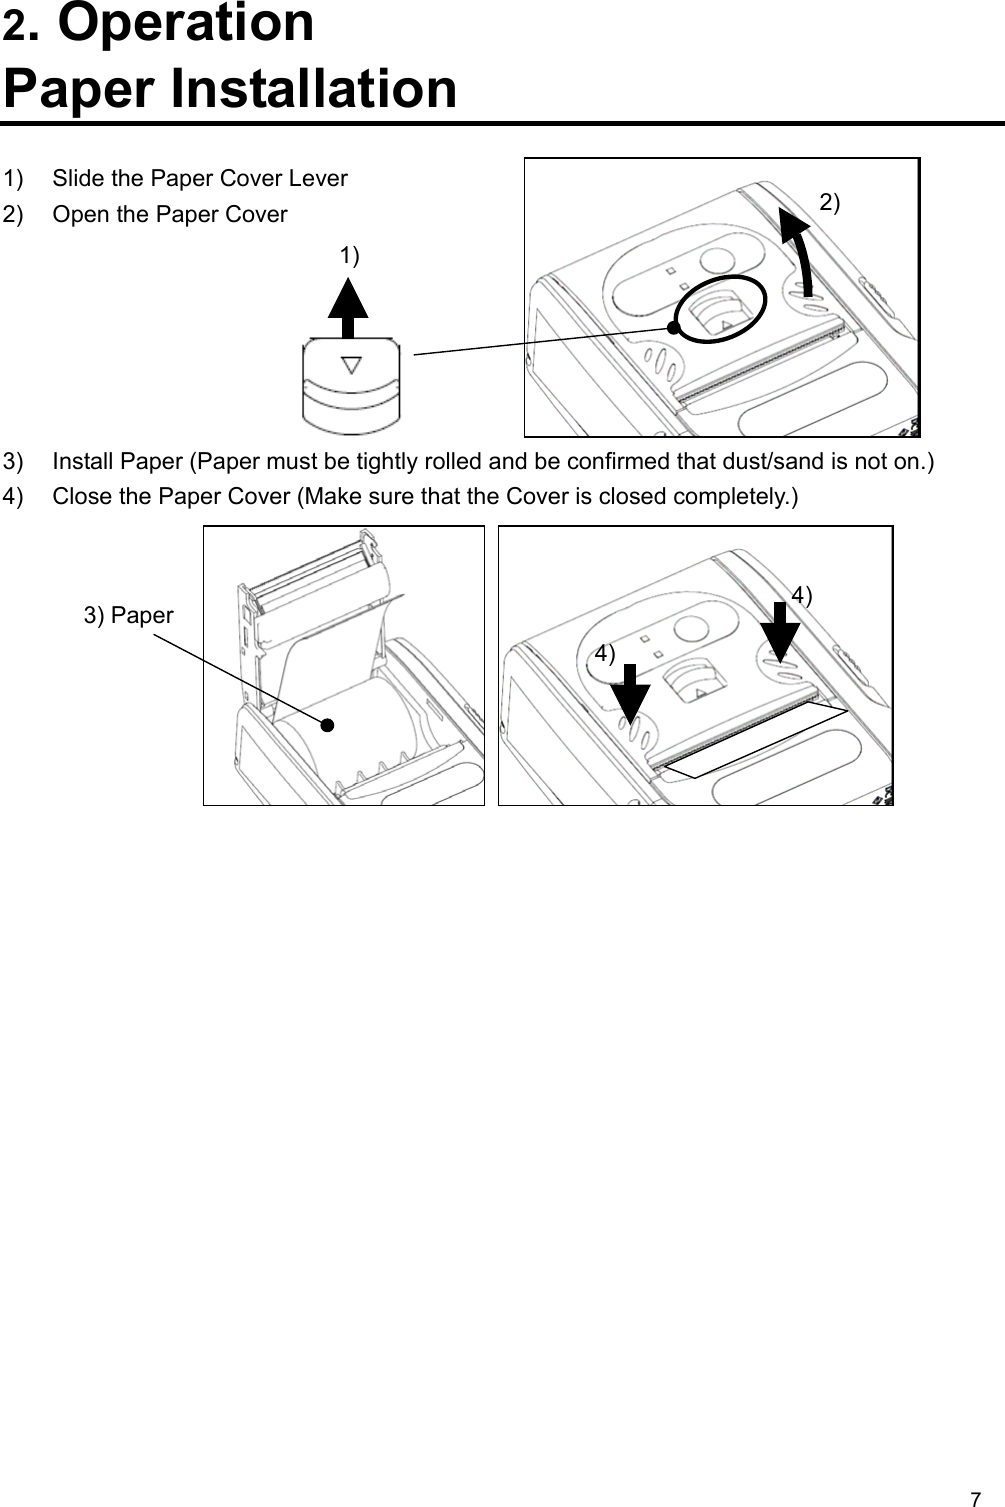 7  2. Operation Paper Installation  1)  Slide the Paper Cover Lever 2)  Open the Paper Cover       3)  Install Paper (Paper must be tightly rolled and be confirmed that dust/sand is not on.) 4)  Close the Paper Cover (Make sure that the Cover is closed completely.)          1) 2) 3) Paper4) 4) 